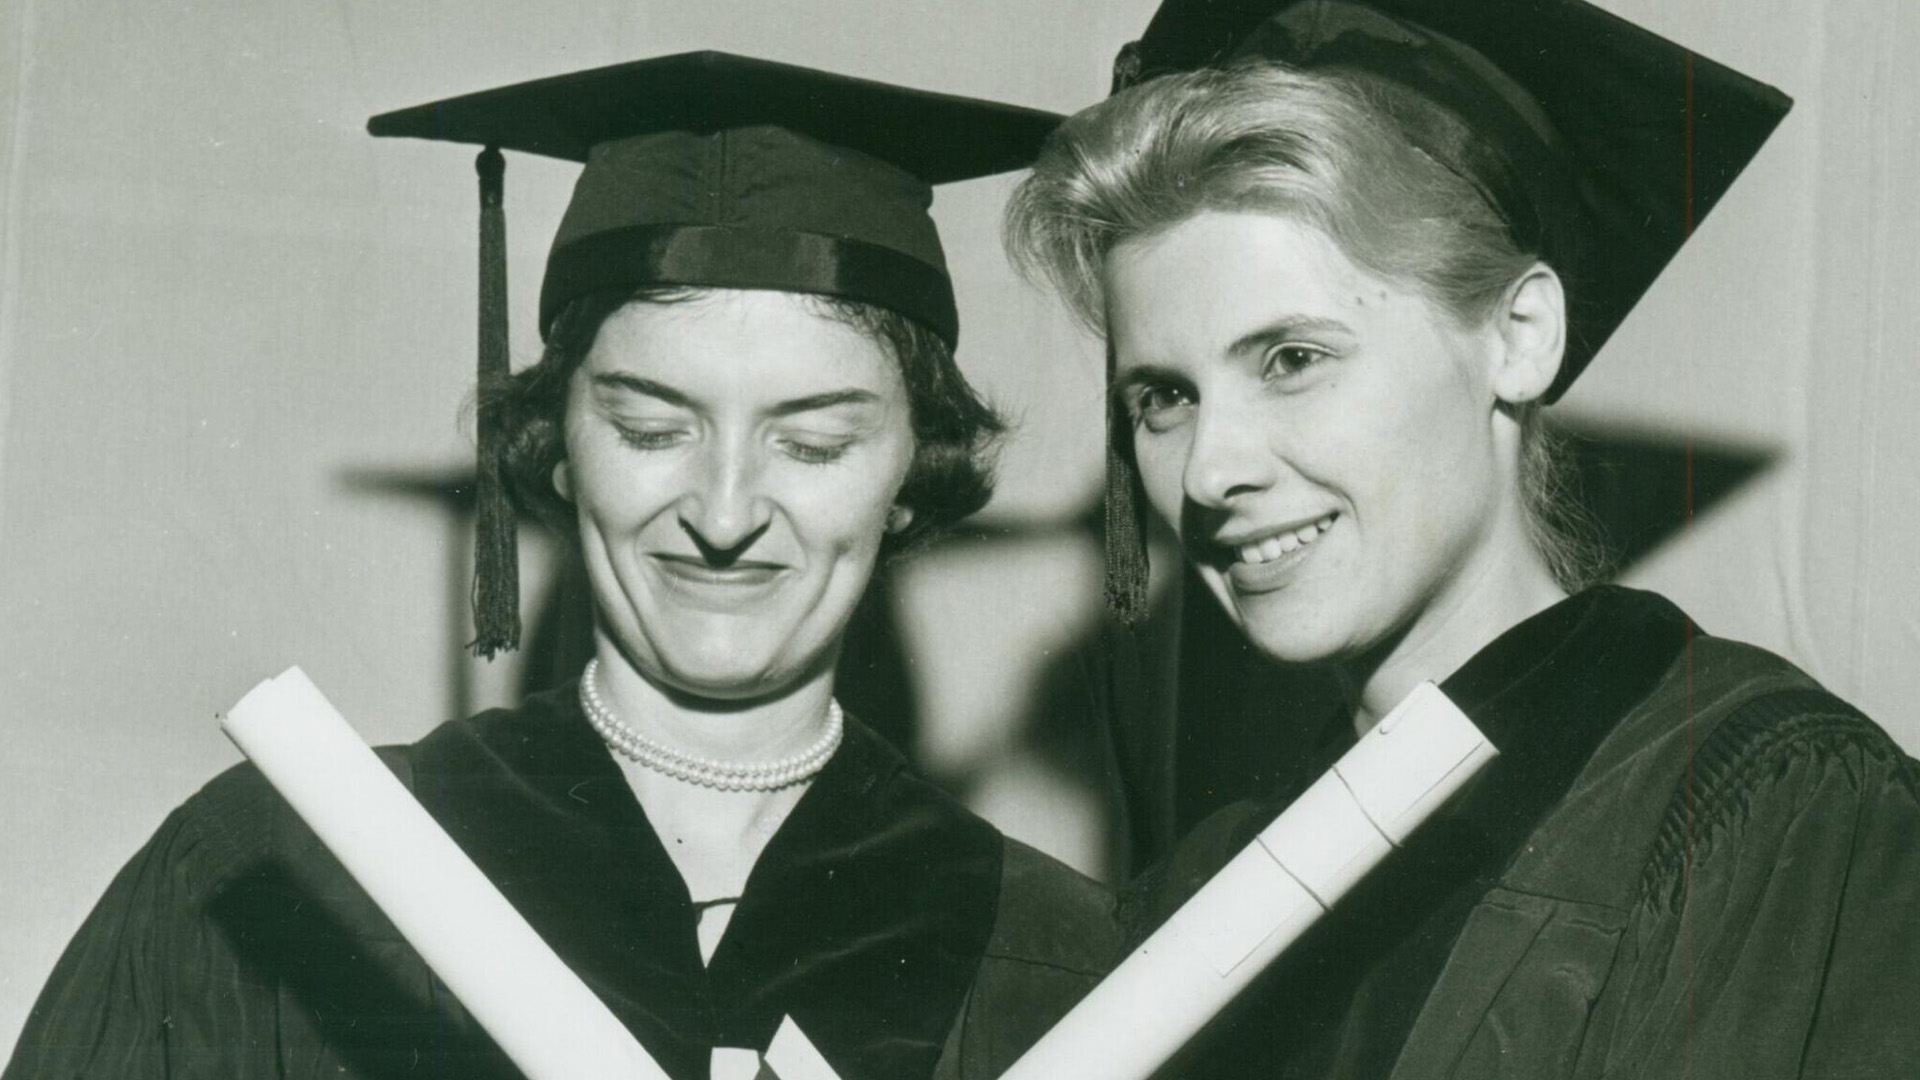 Dr. Nancy Szwec Czarnecki was both the first woman to matriculate to and the first woman to graduate from Jefferson Medical College.